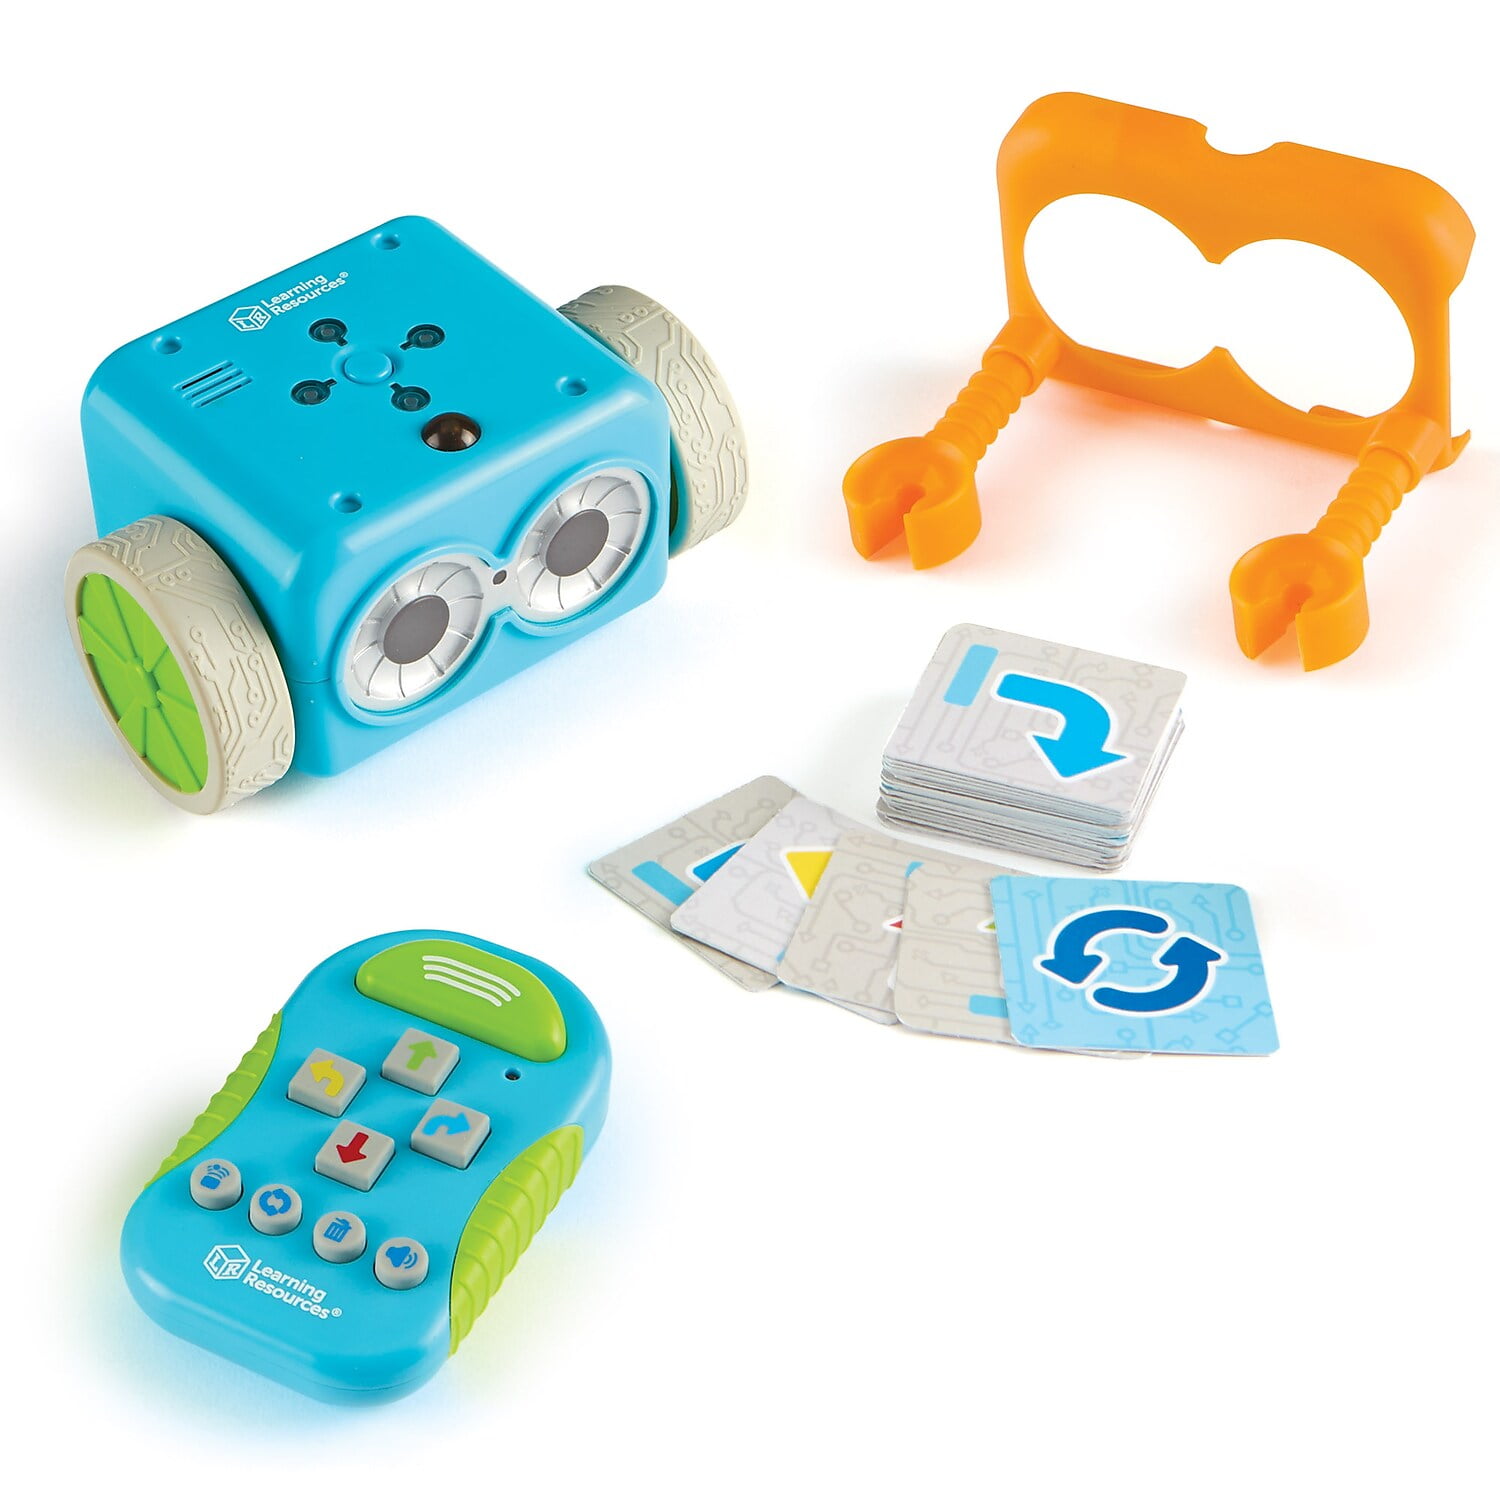 BOTLEY 2.0 THE CODING ROBOT- KIDS CAN CODE SCREEN-FREE! - Janie